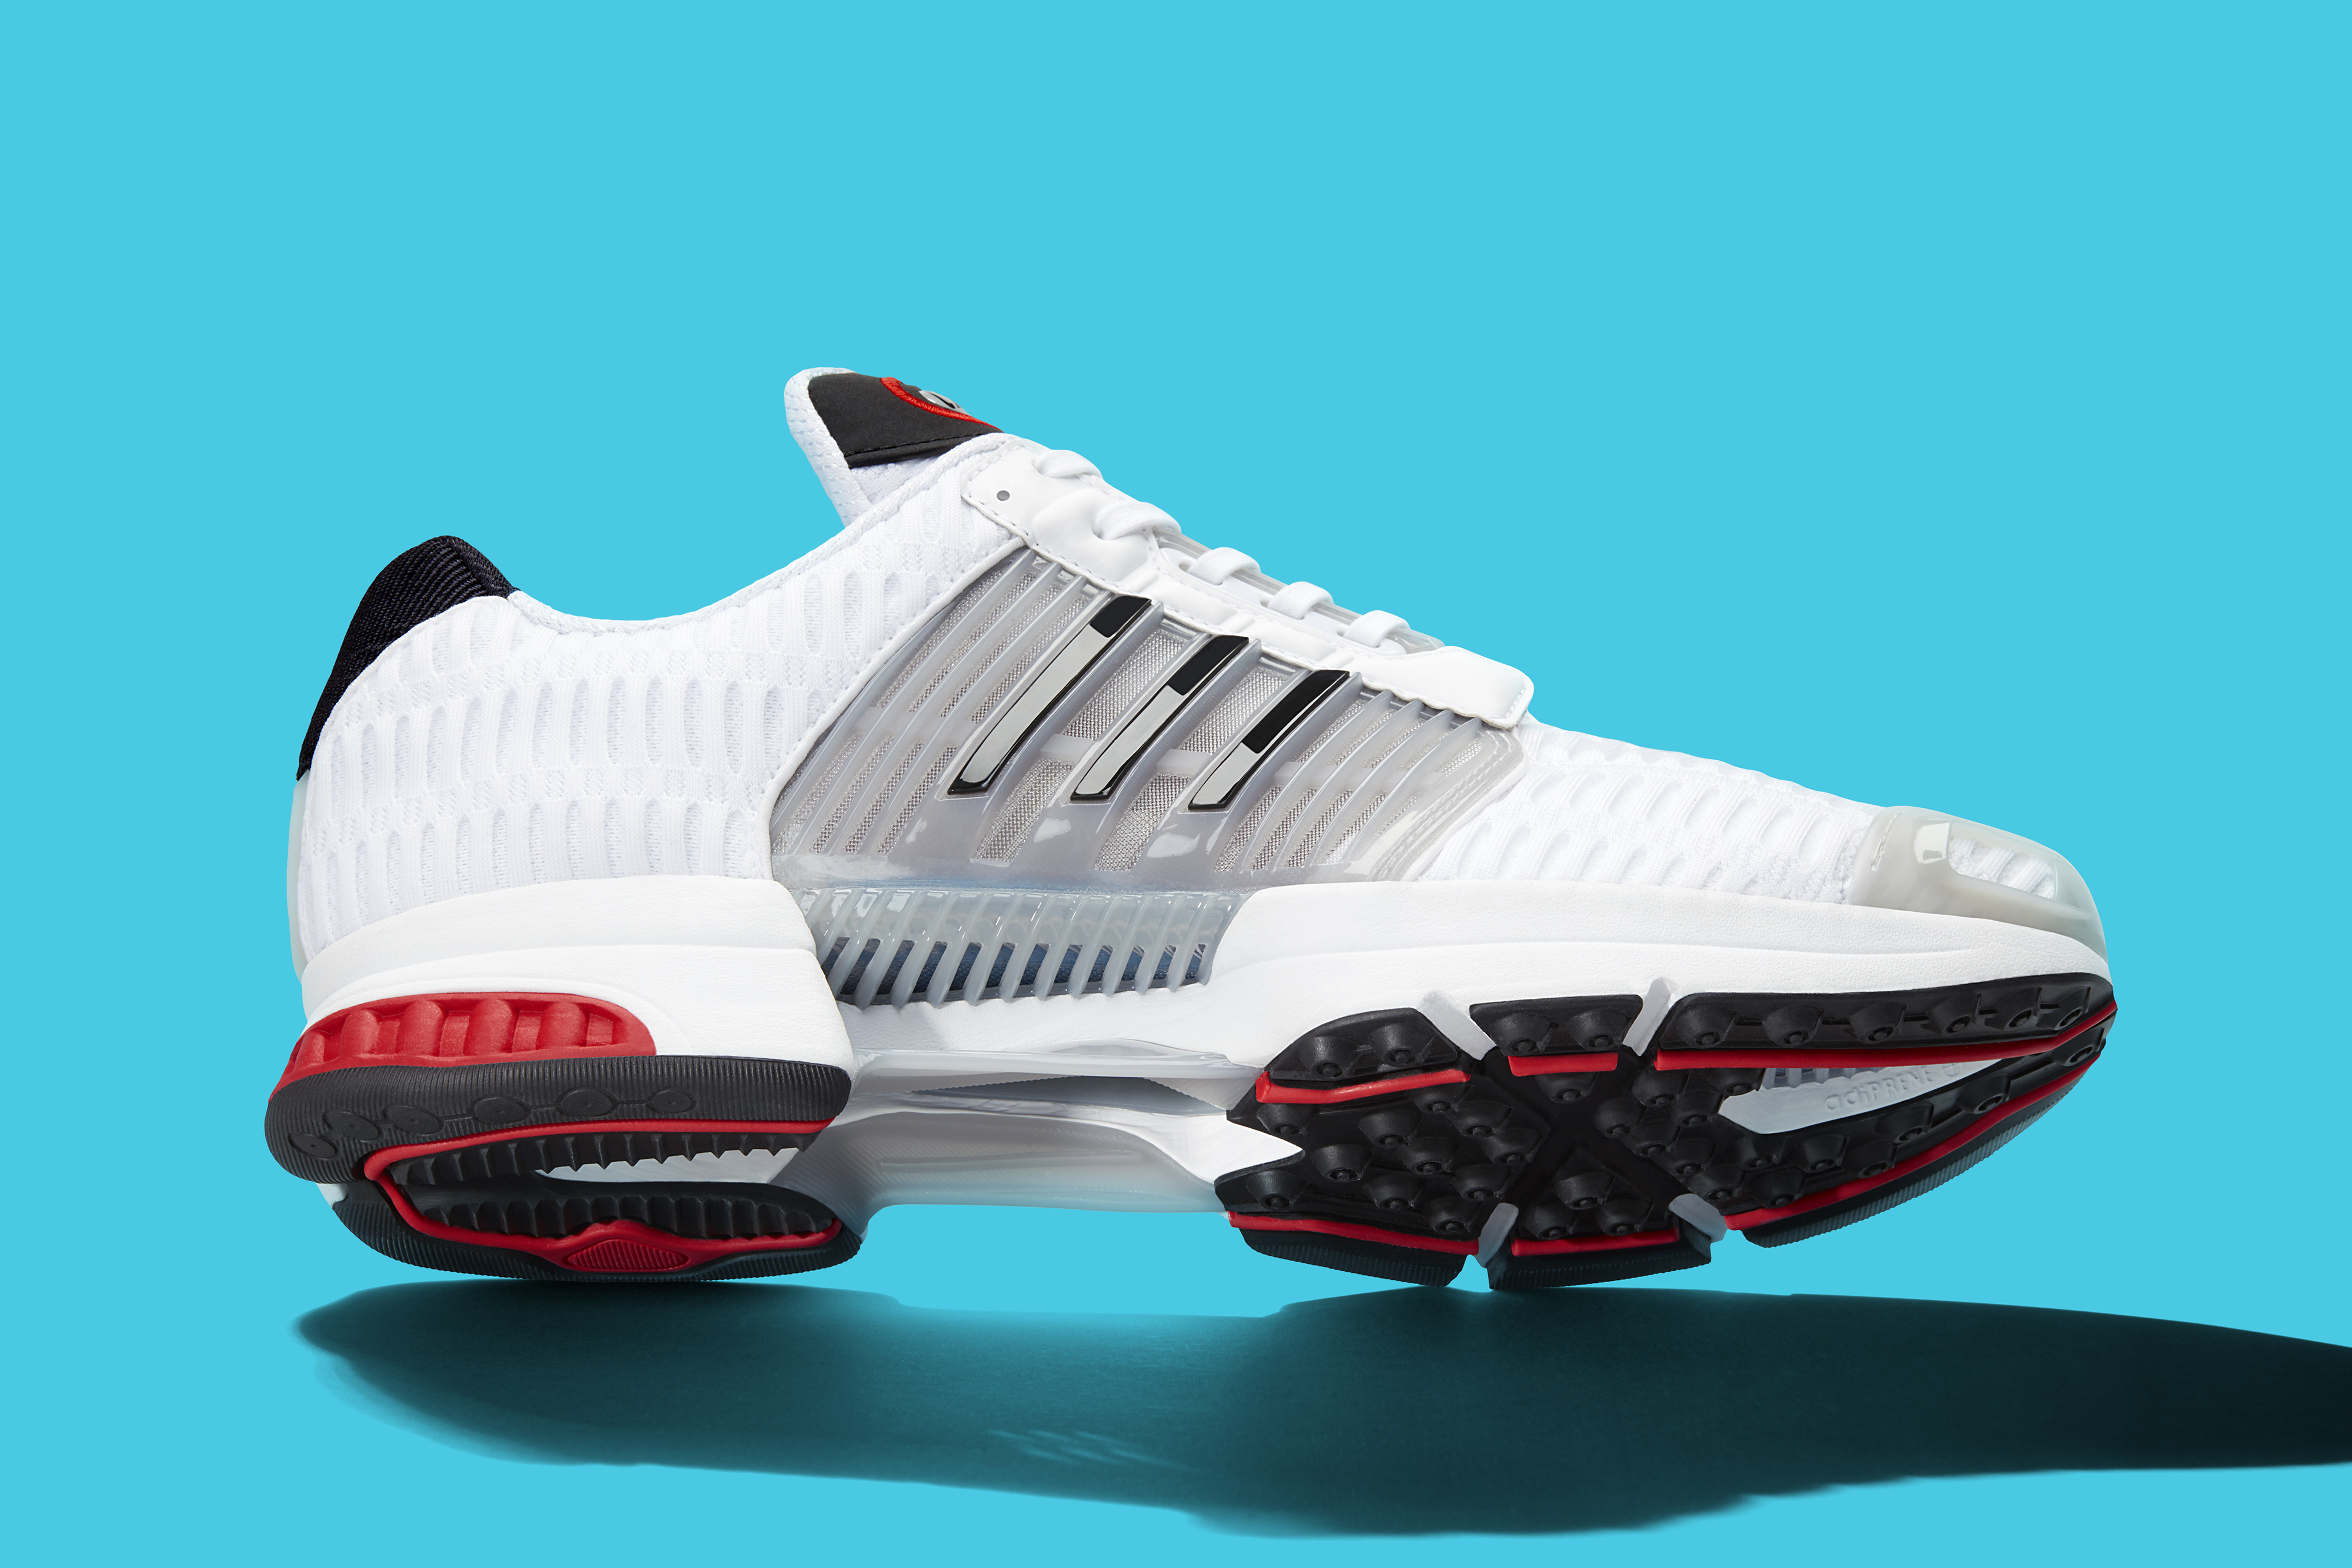 adidas Climacool "Anniversary" Pack